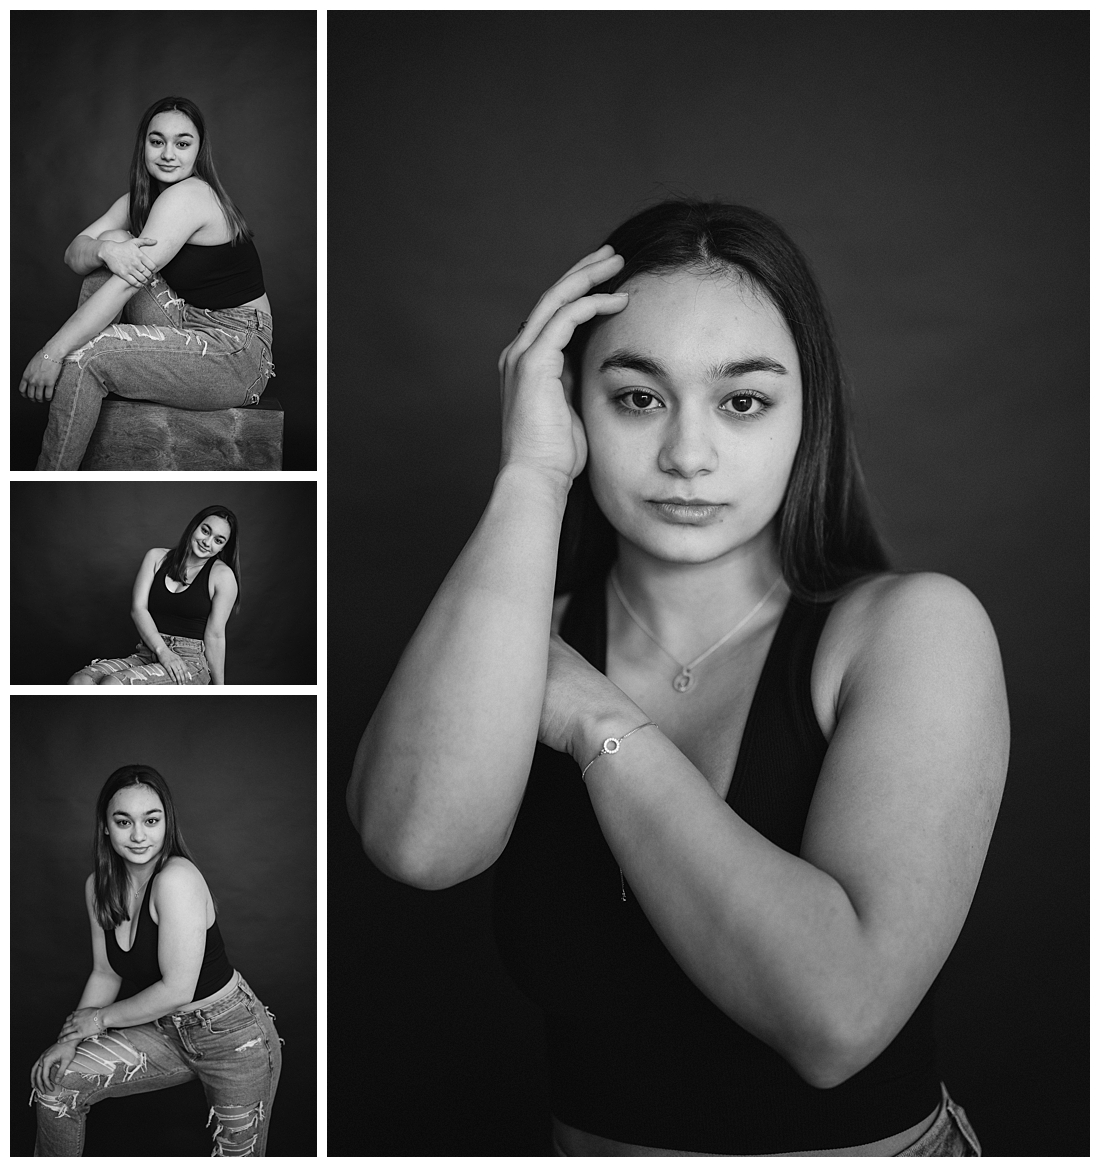 Modern High School Senior Portraits without makeup or filters | Photographed by the best Tacoma, Washington Senior Photographer Amanda Howse